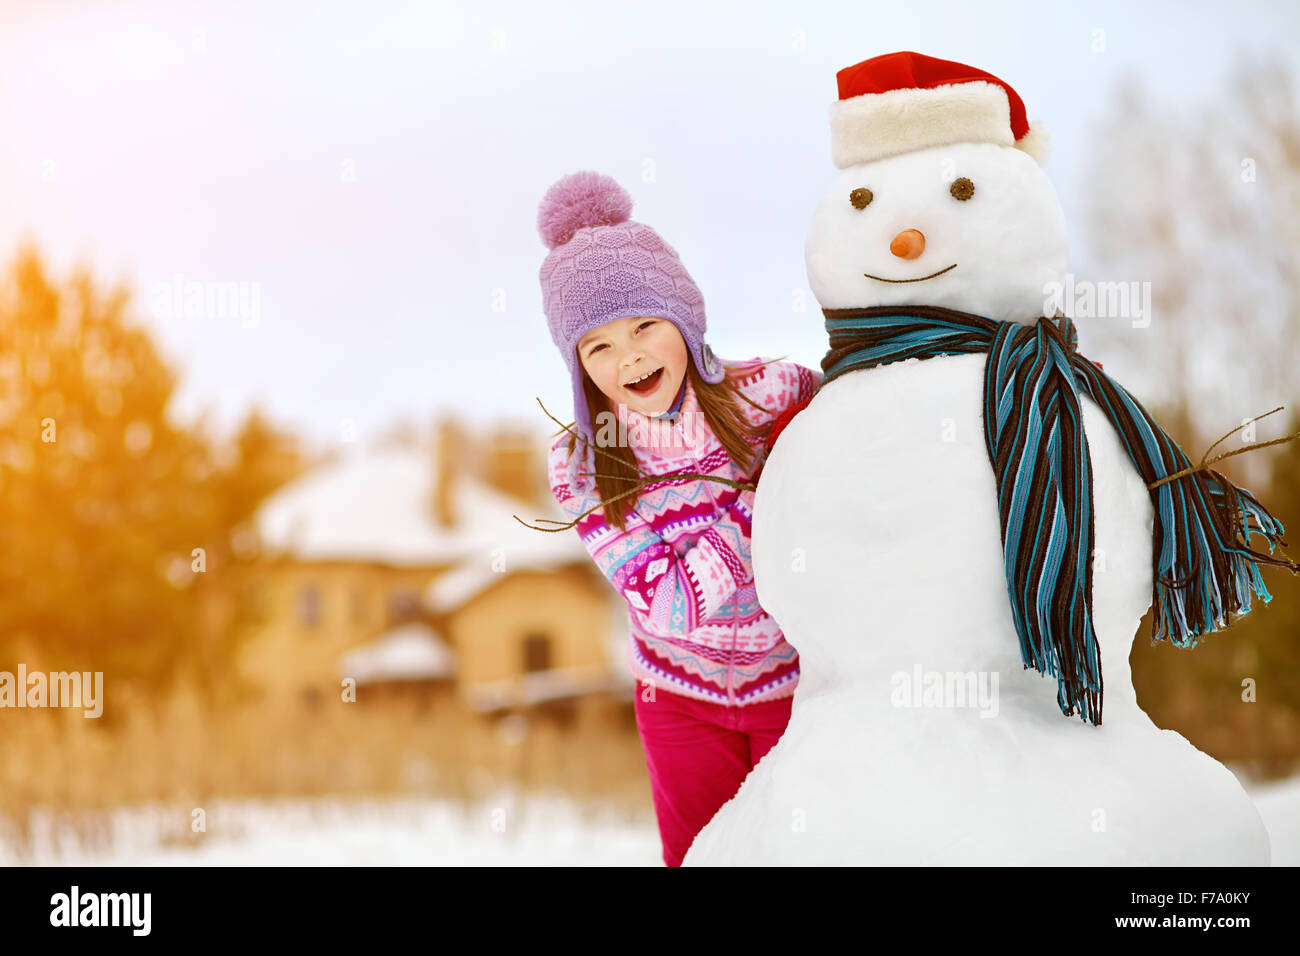 kid playing with snowman Stock Photo